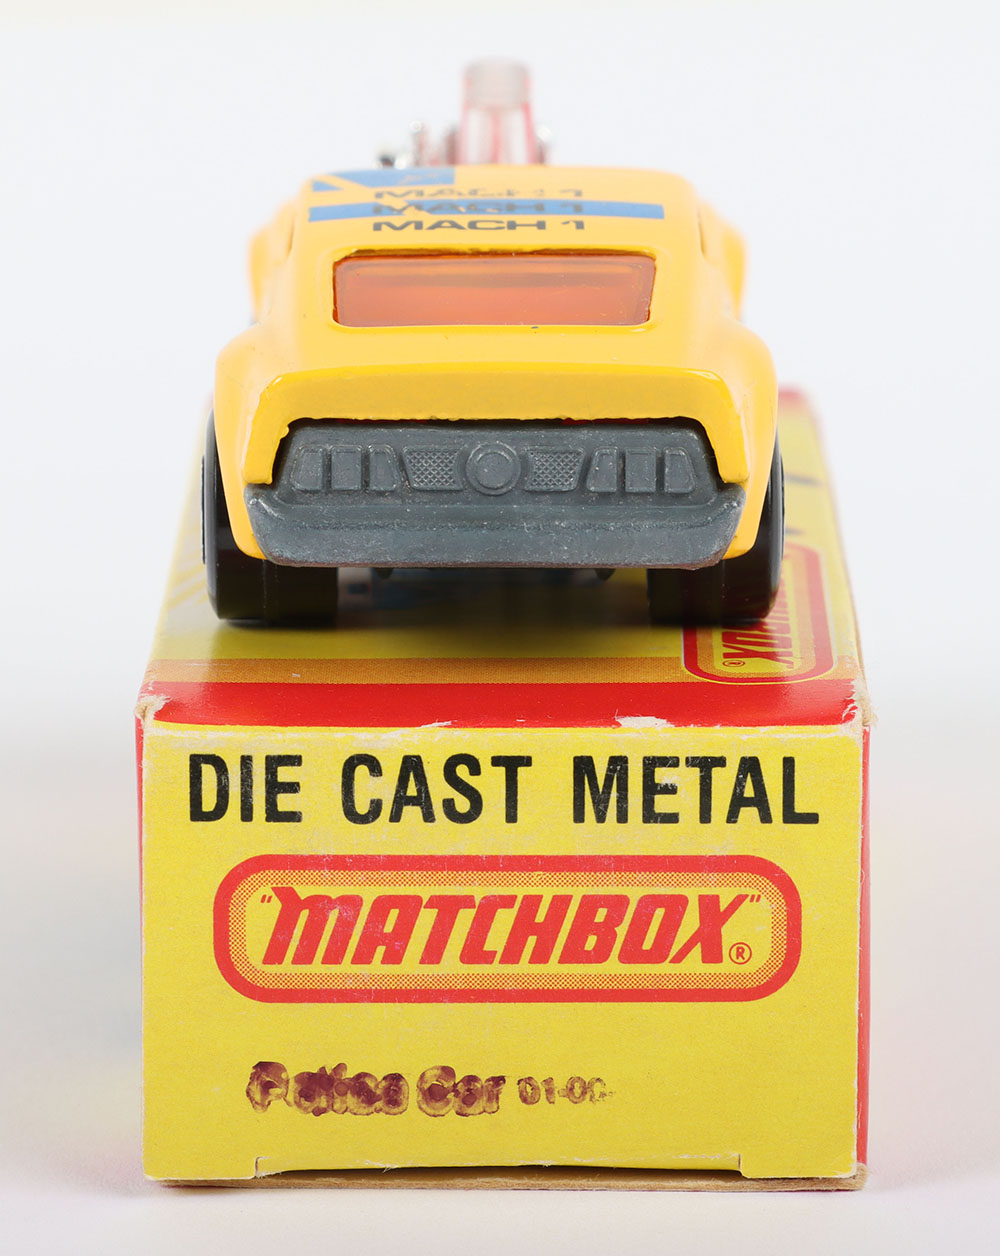 Matchbox Lesney Superfast MB-10 Piston Popper with hard to find YELLOW body & MACH 1 PISTON POPPER 6 - Image 3 of 5